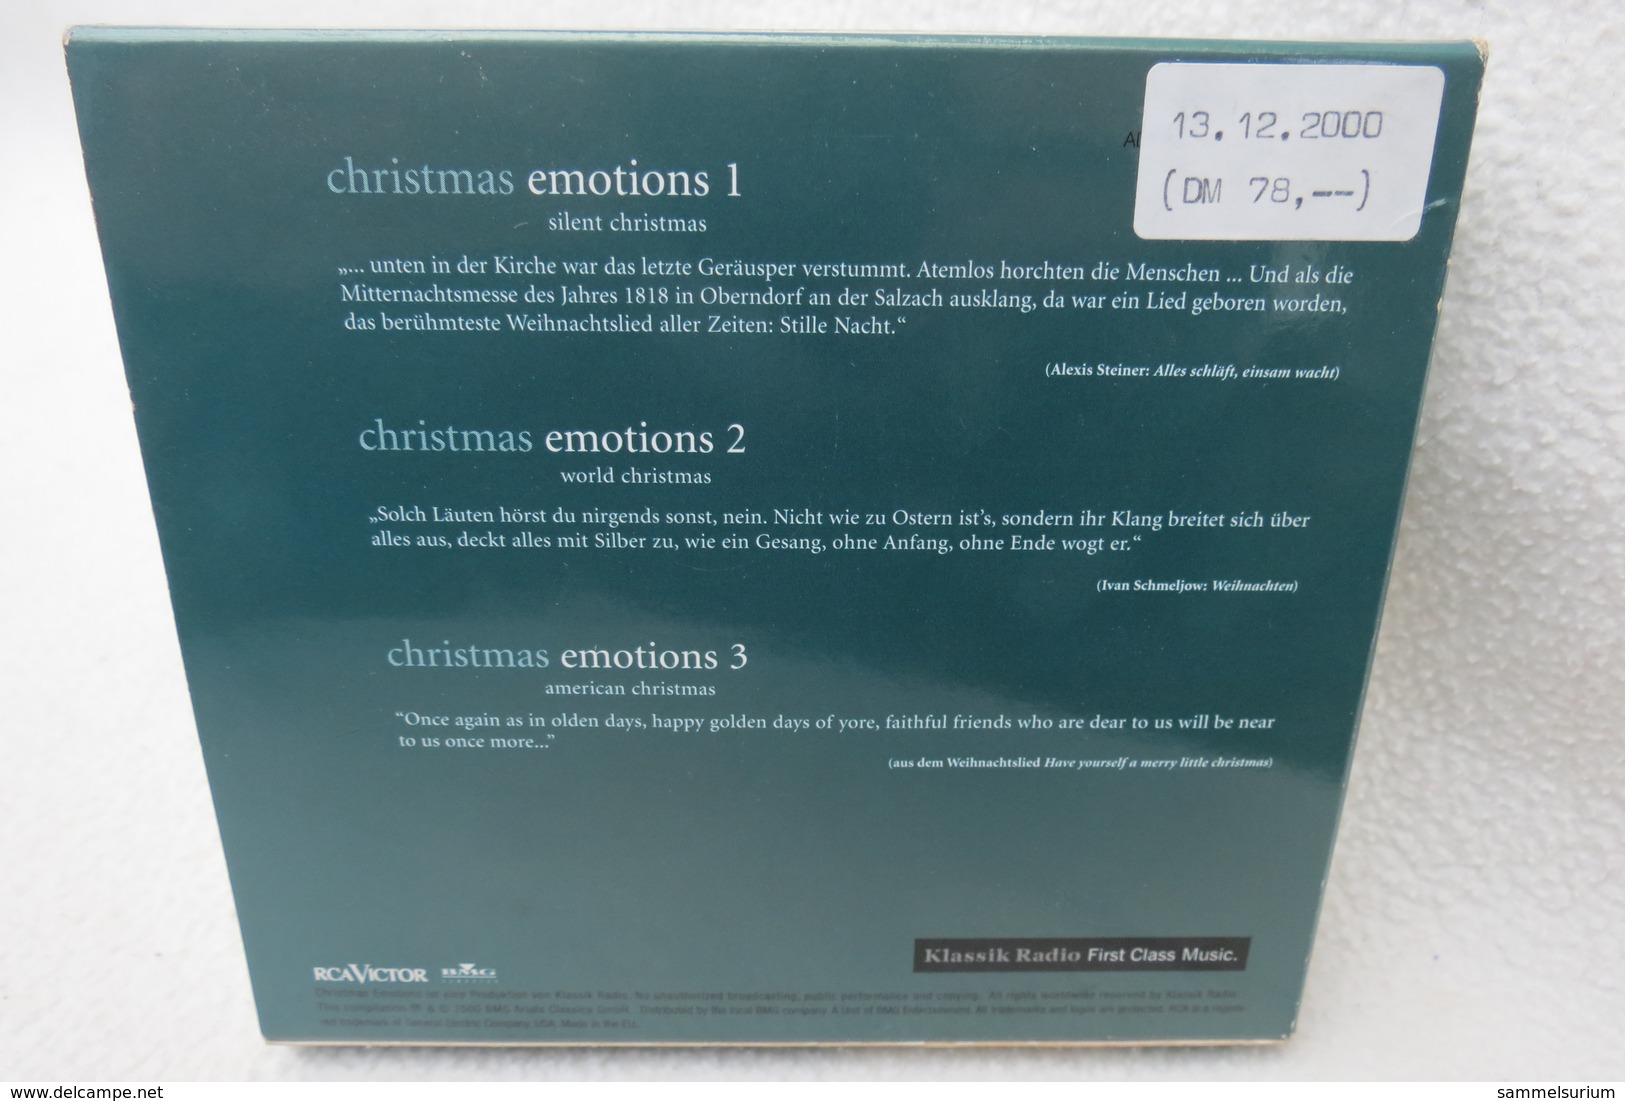 3 CD-Set "Christmas Emotions" First Class Music By Klassik Radio - Weihnachtslieder